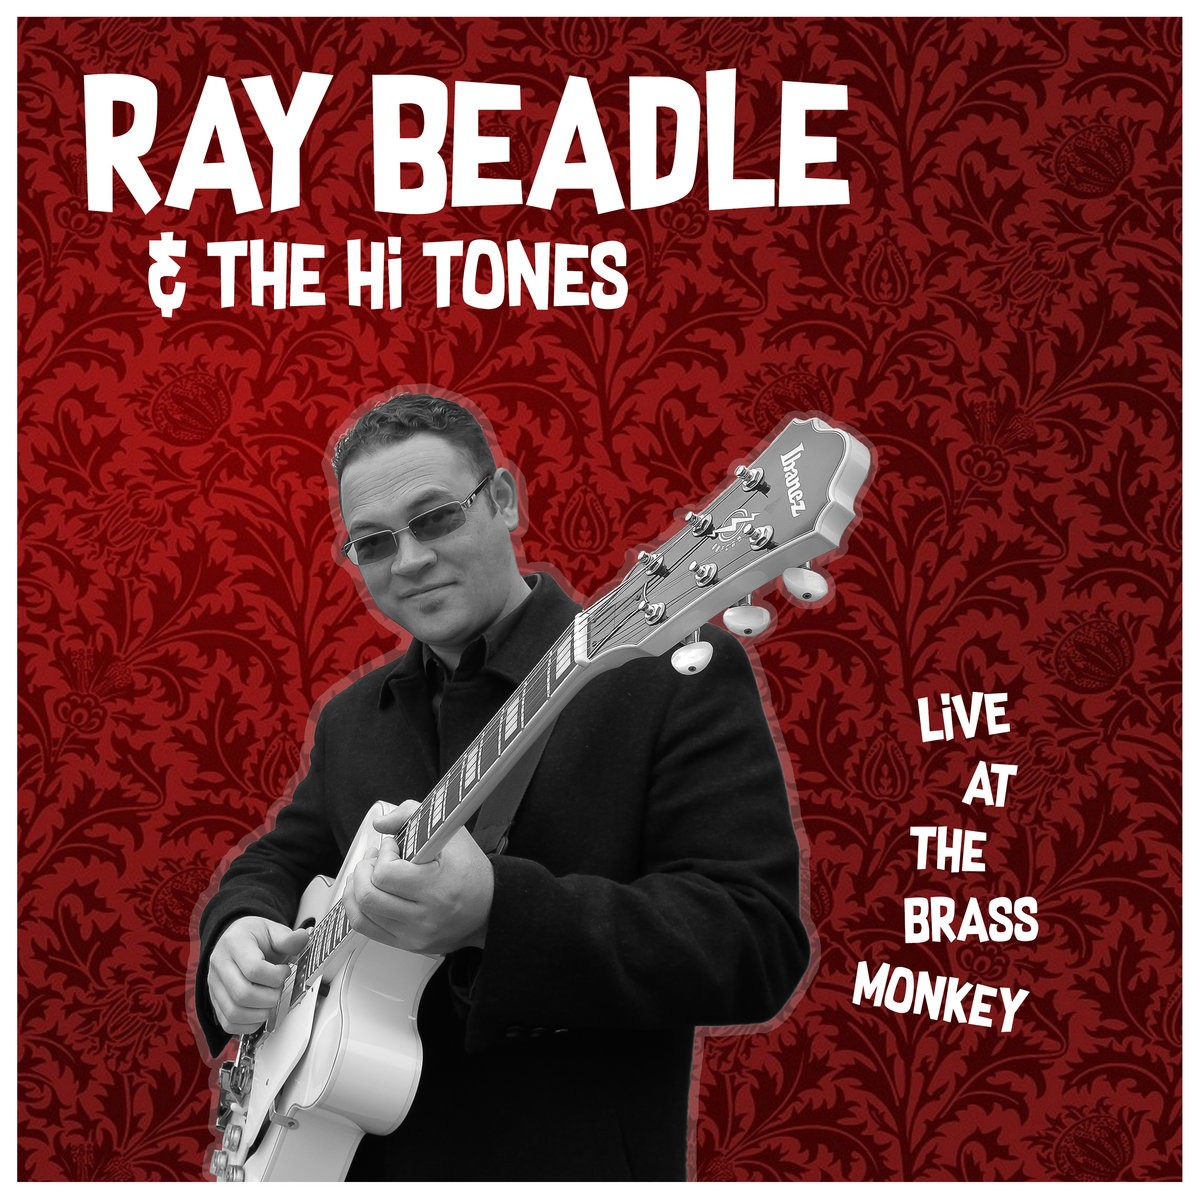 Ray Beadle & The Hi Tones - Live At The Brass Monkey